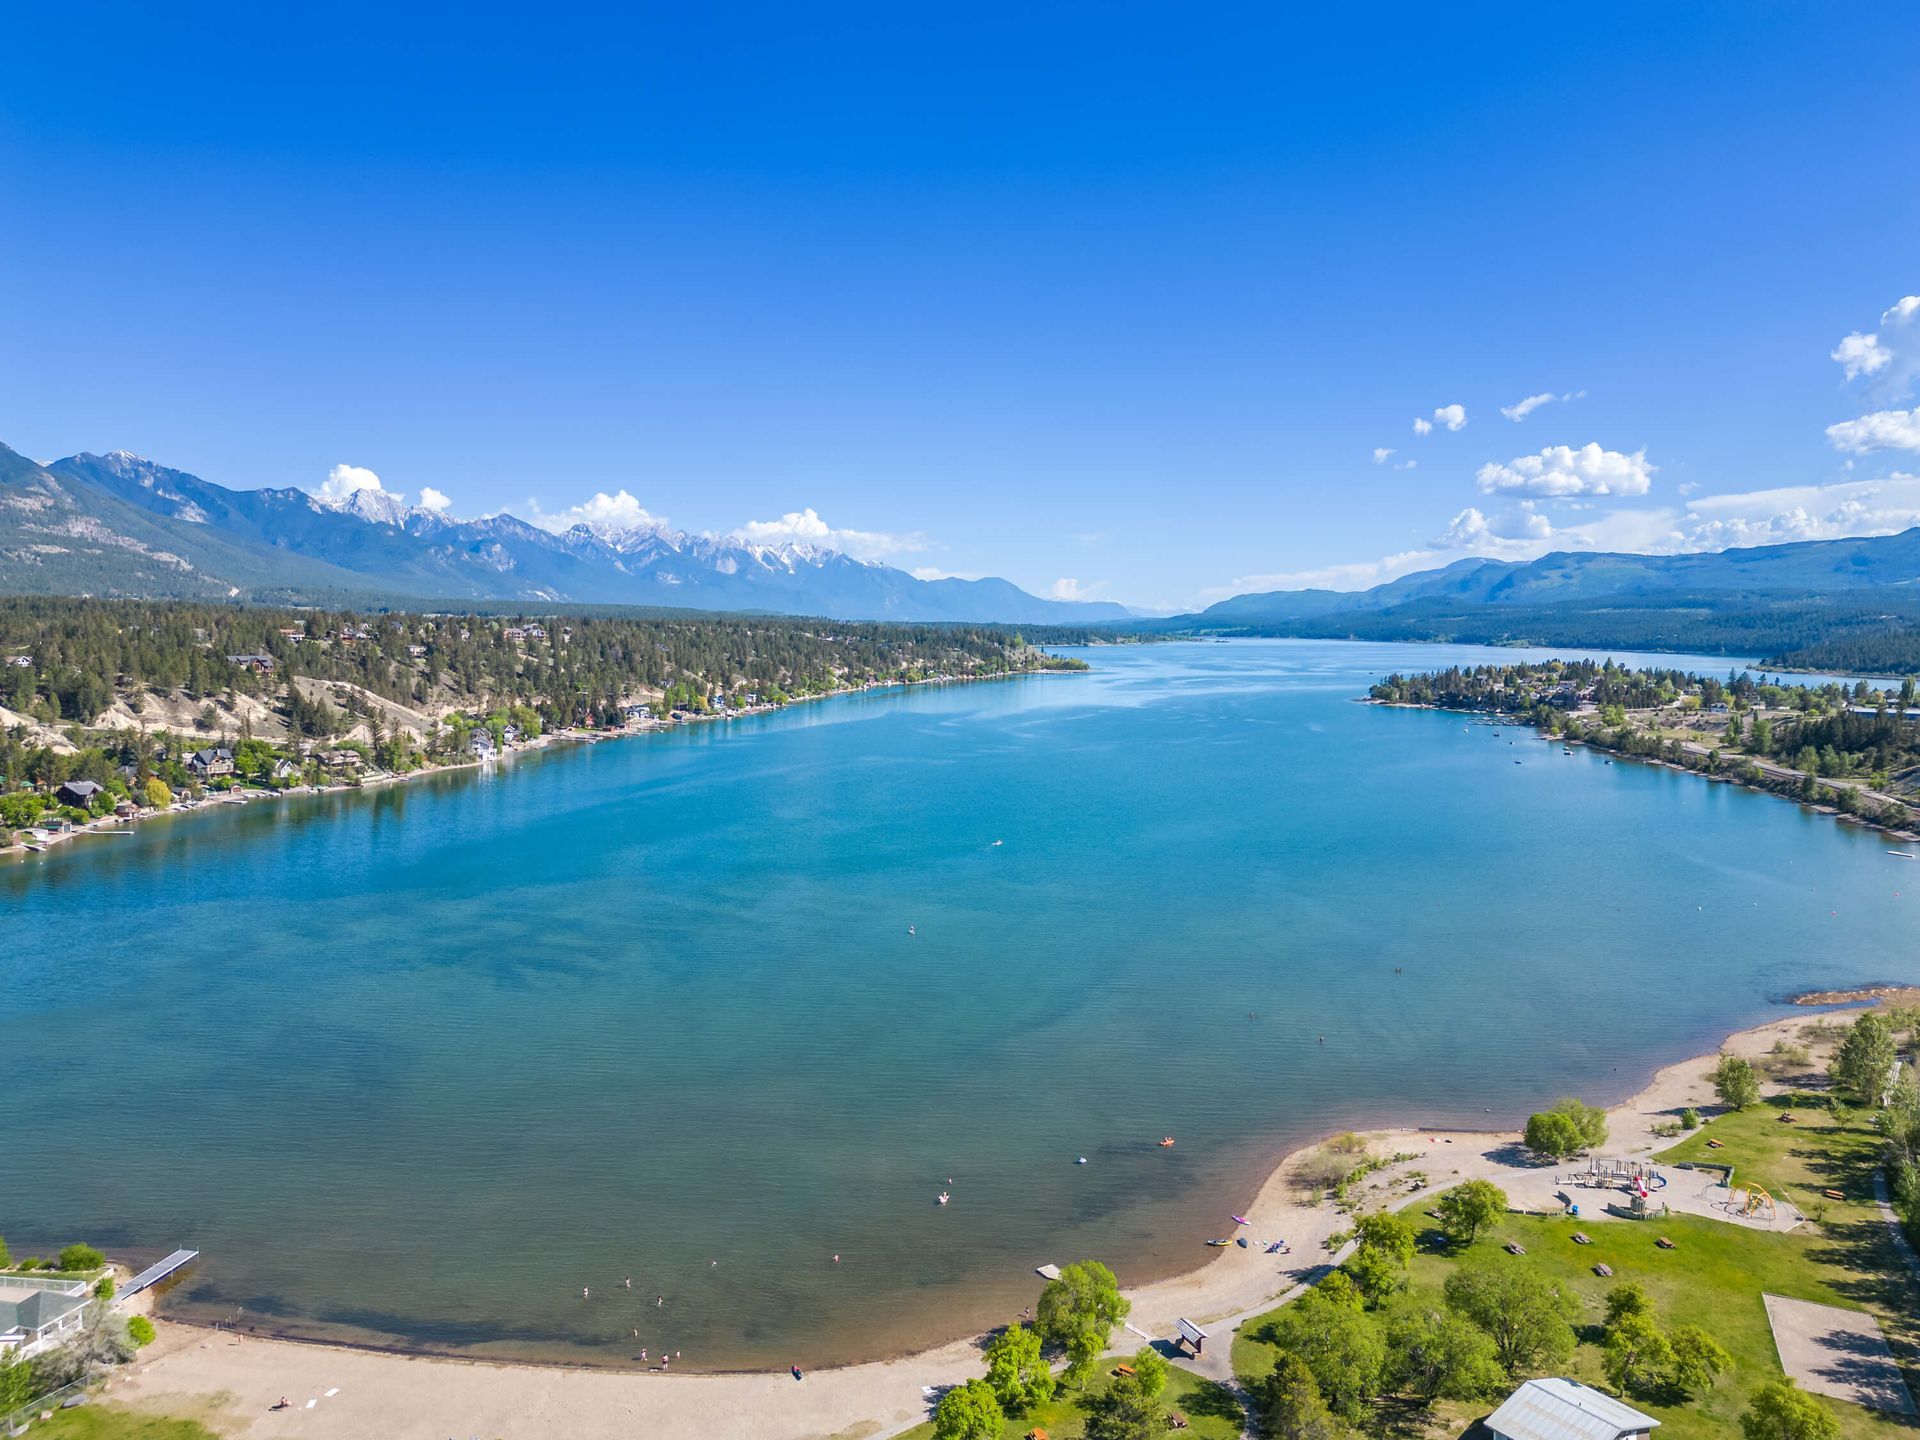 James Chabot Beach at the Lake Windermere Pointe Condos in Invermere, BC managed by Aisling Baile Property Management